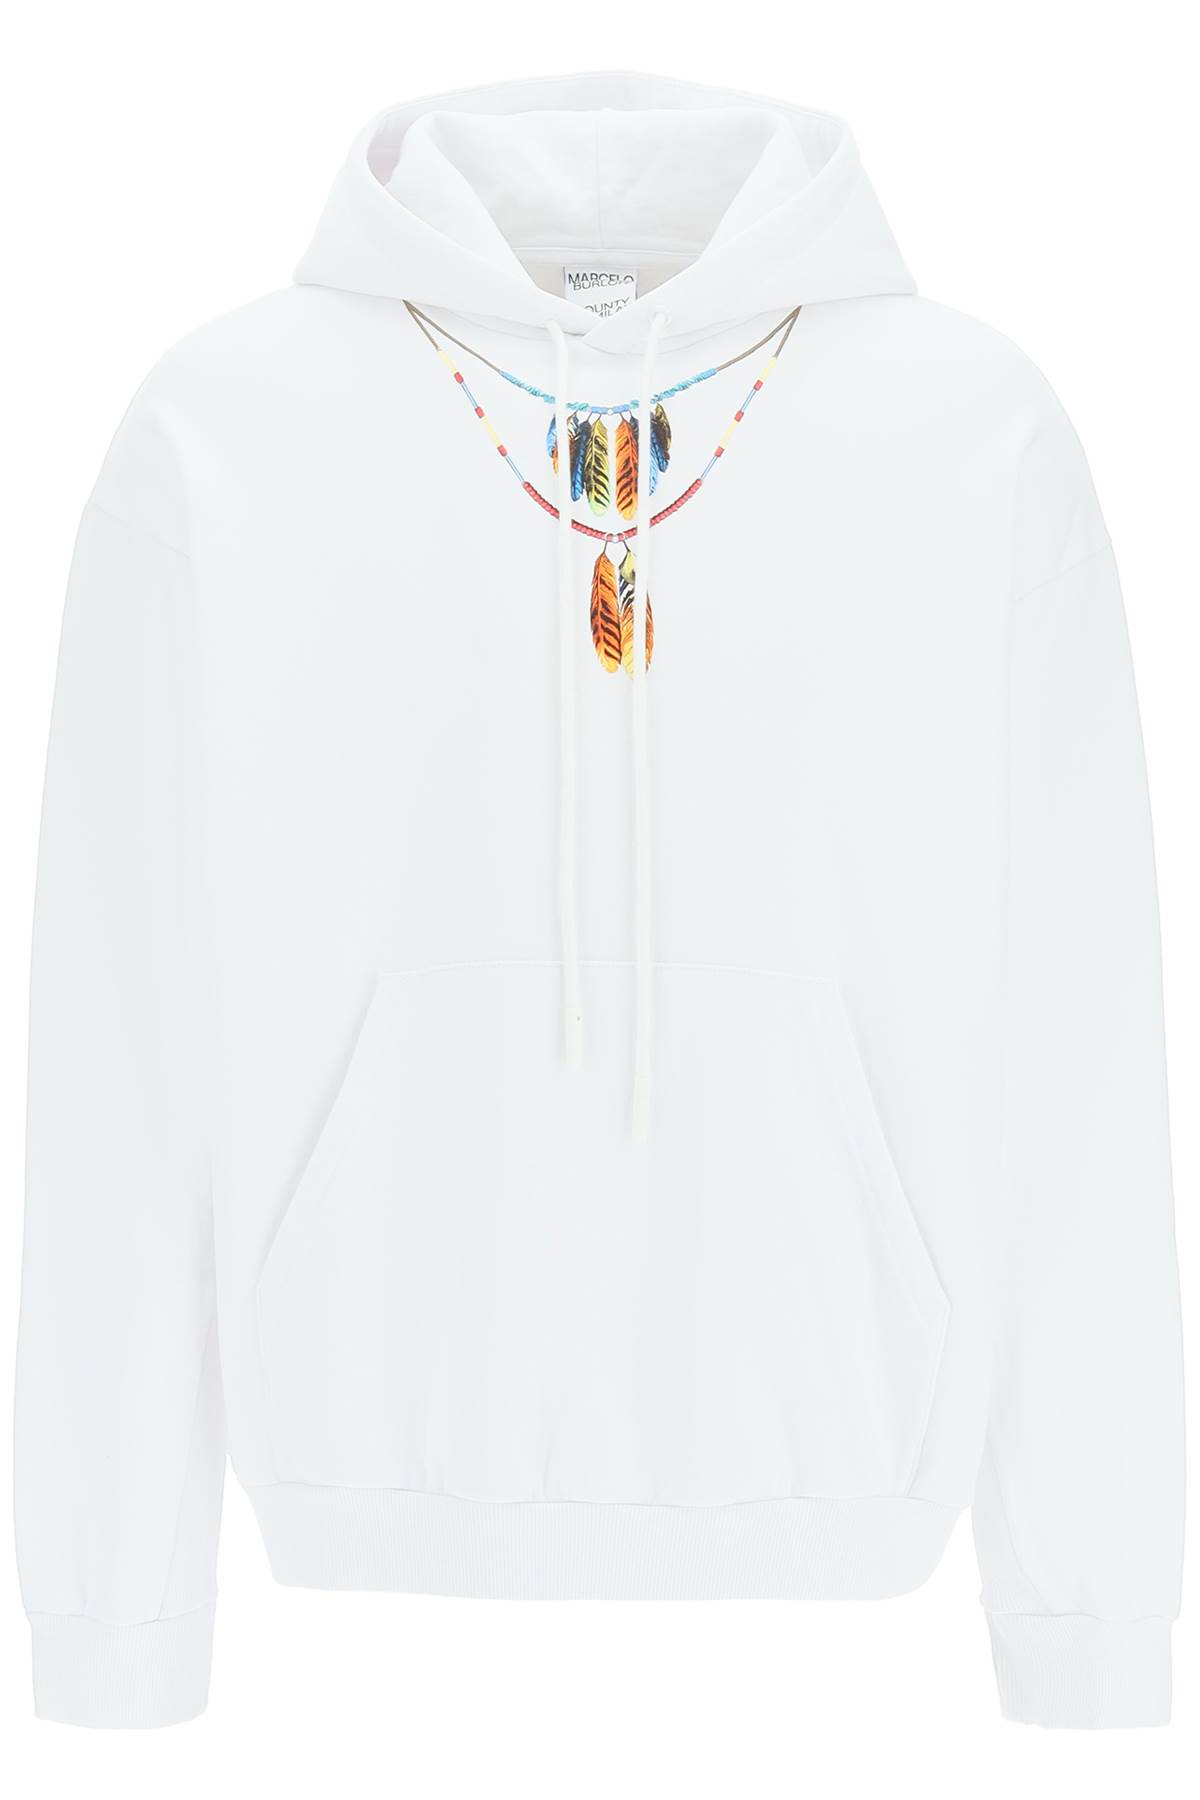 MARCELO BURLON COUNTY OF MILAN FEATHERS NECKLACE HOODIE